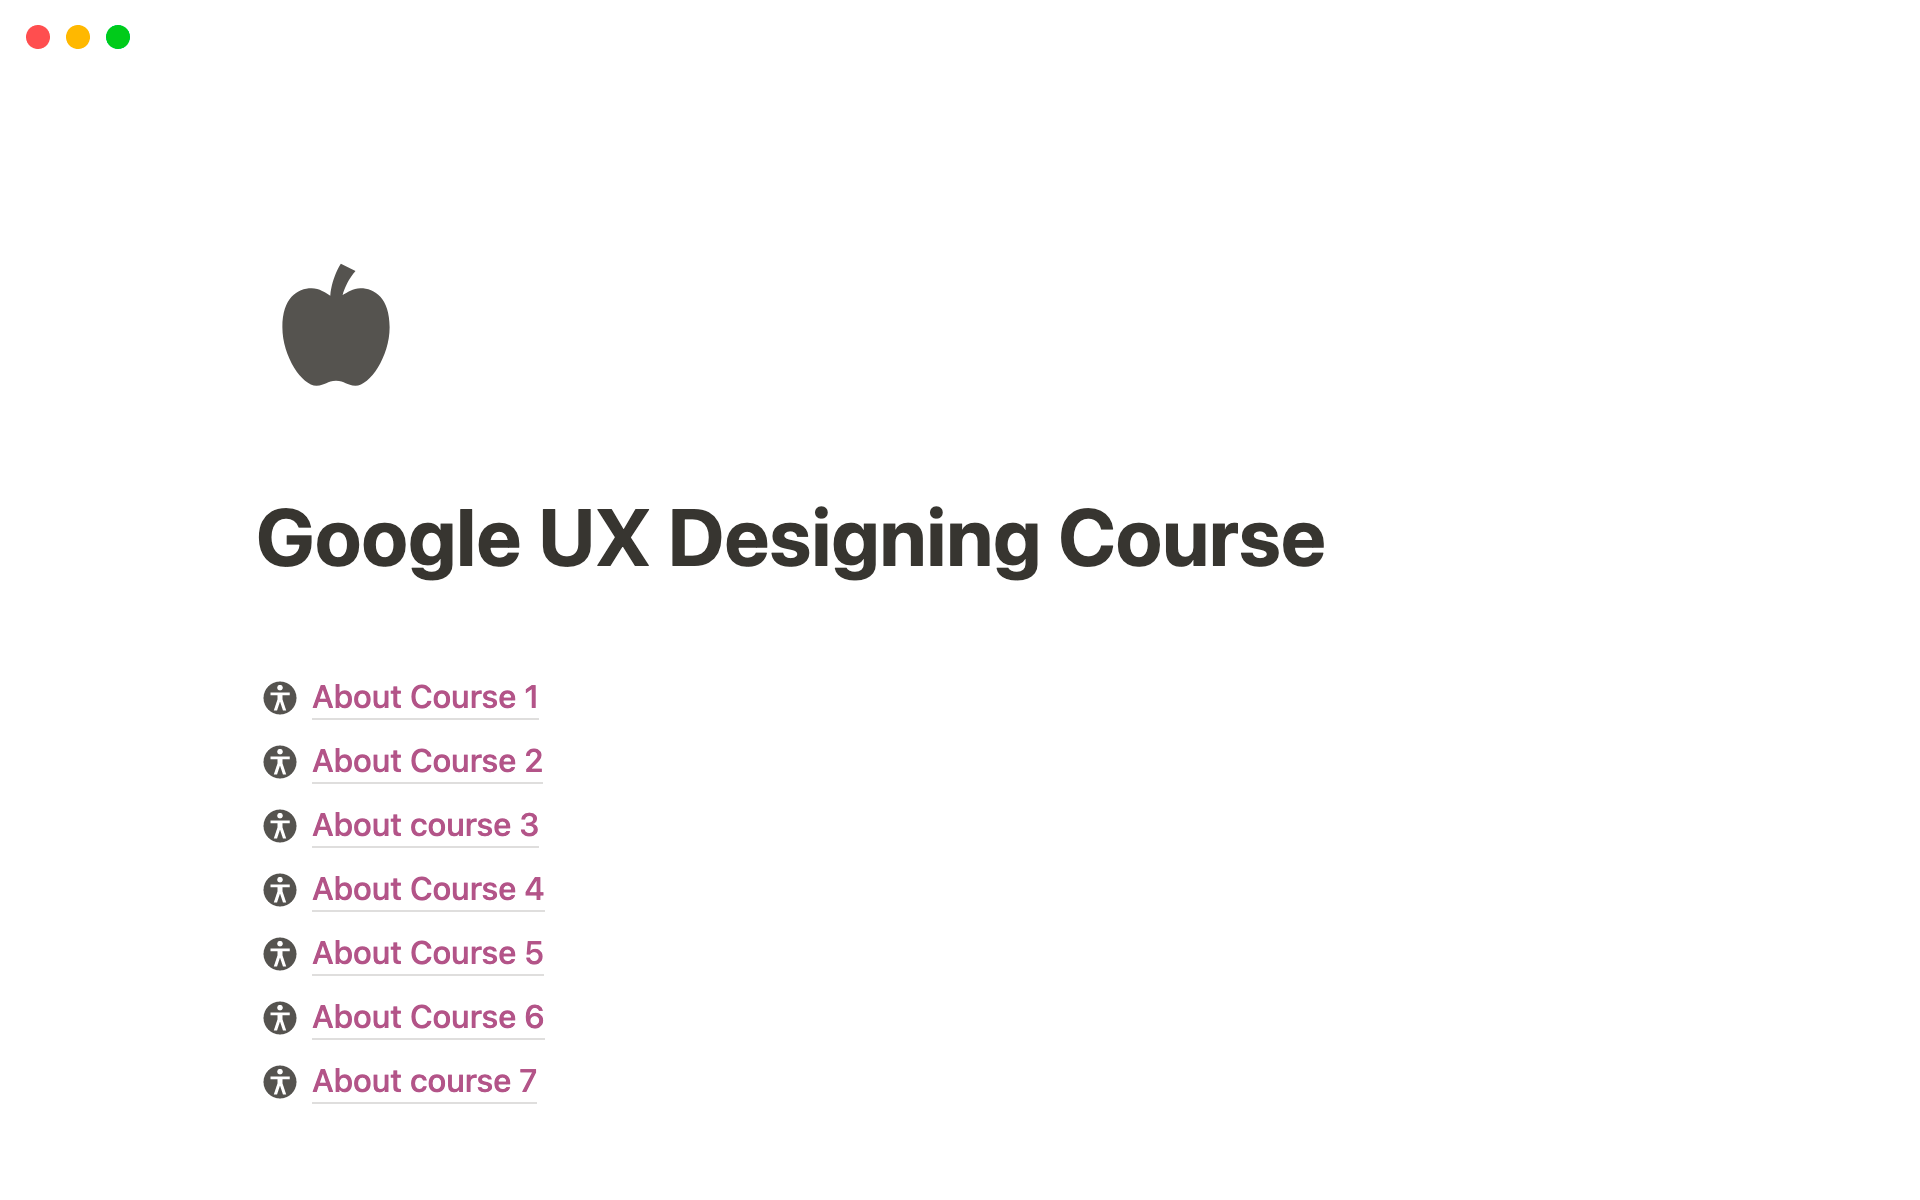 The Google UX design course notes template provides a comprehensive, organized for anyone interested in learning about UX design, covering 7+ courses, 35+ weeks, and 250+ UX articles from Google's experts.